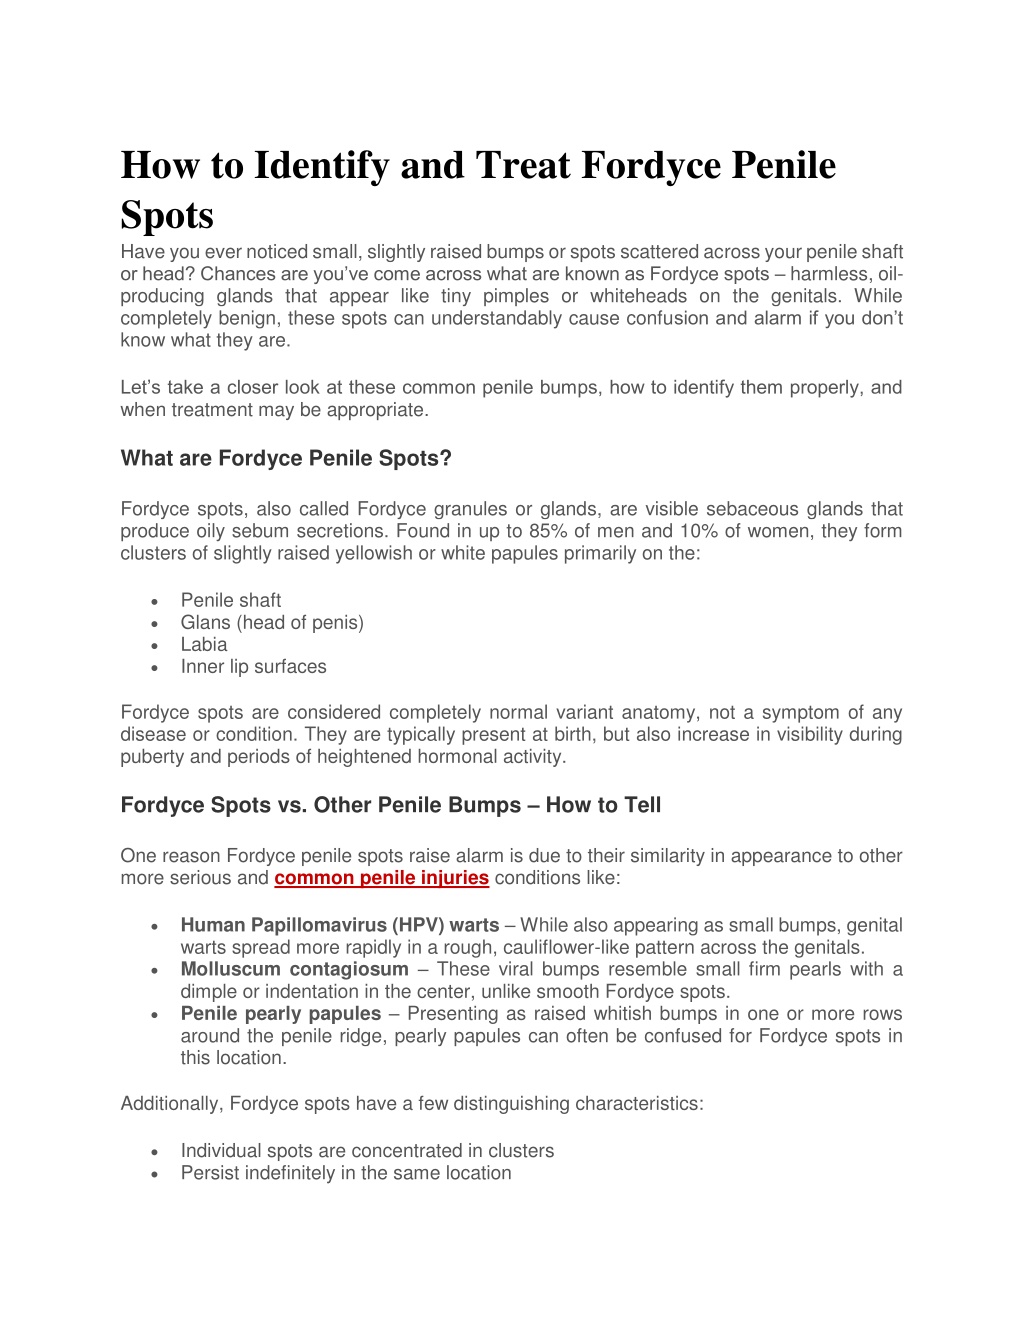 how to identify and treat fordyce penile spots l.w